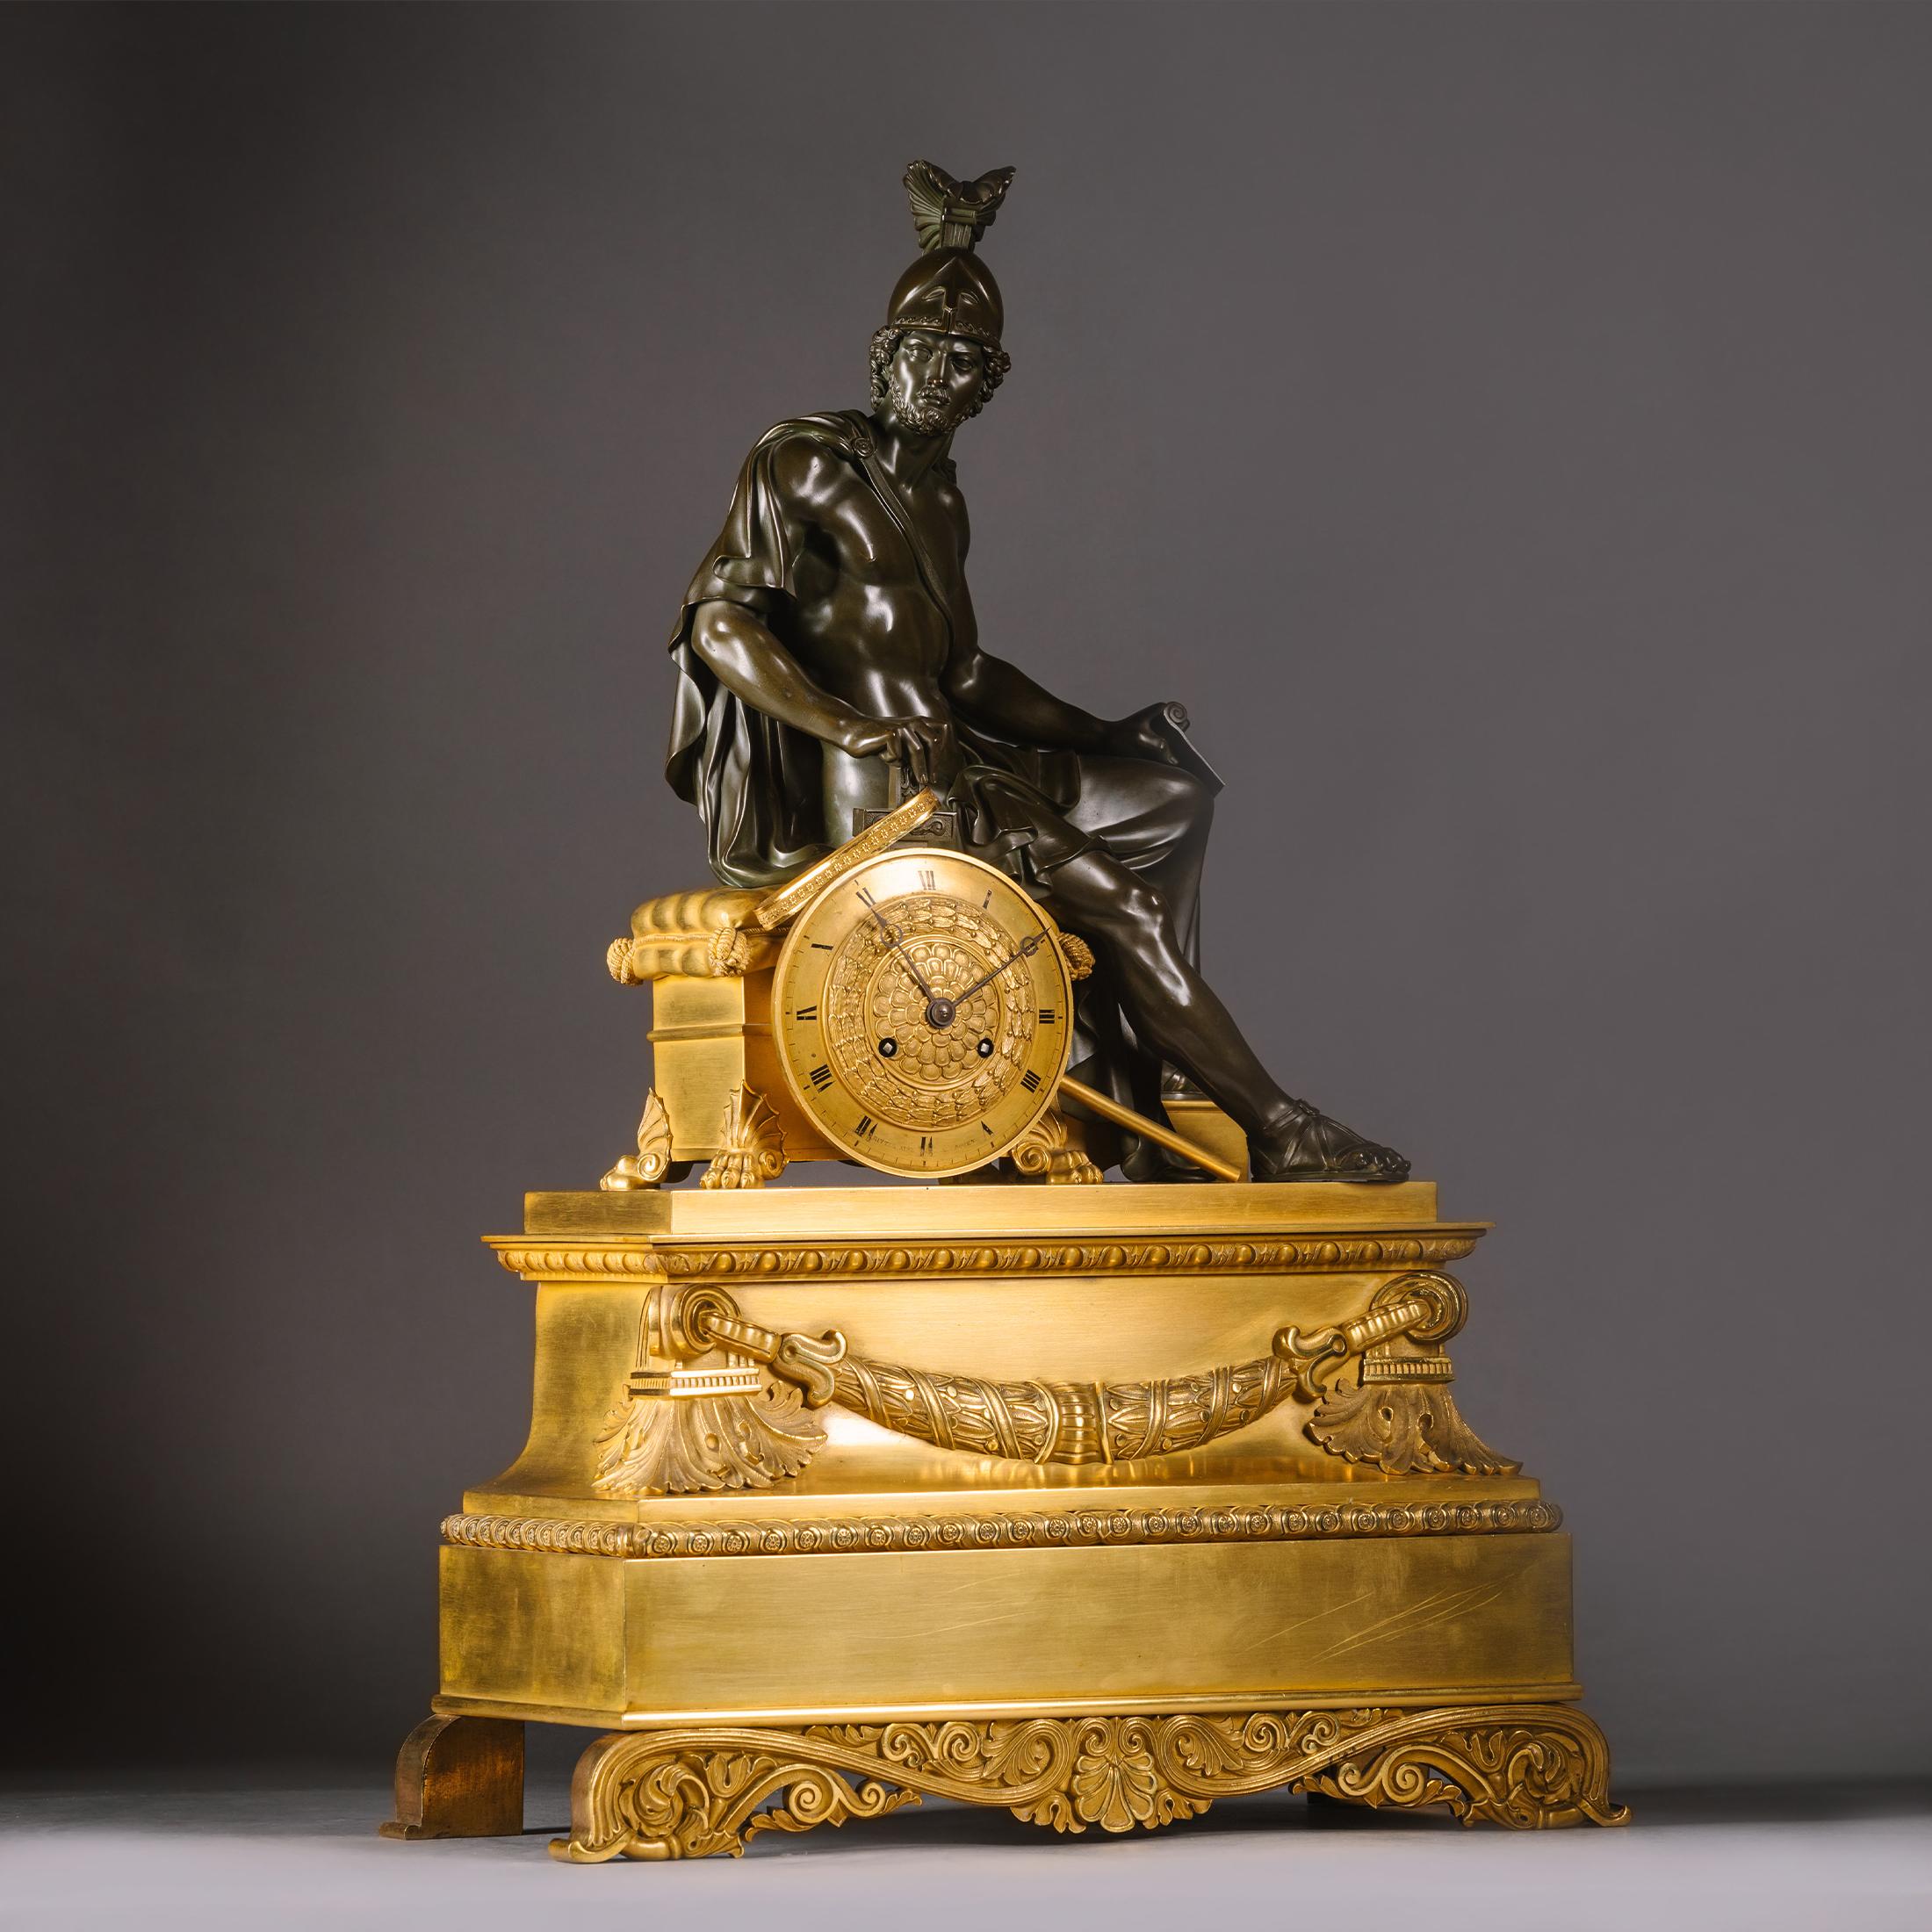 The dial signed 'Ritter Aîné à Rouen',

The case surmounted by a seated figure of Mars holding a scroll marked 'Marathon', seated on a cushioned throne with lion-paw feet, below him is a circular dial relief-cast with laurel and Roman numerals,